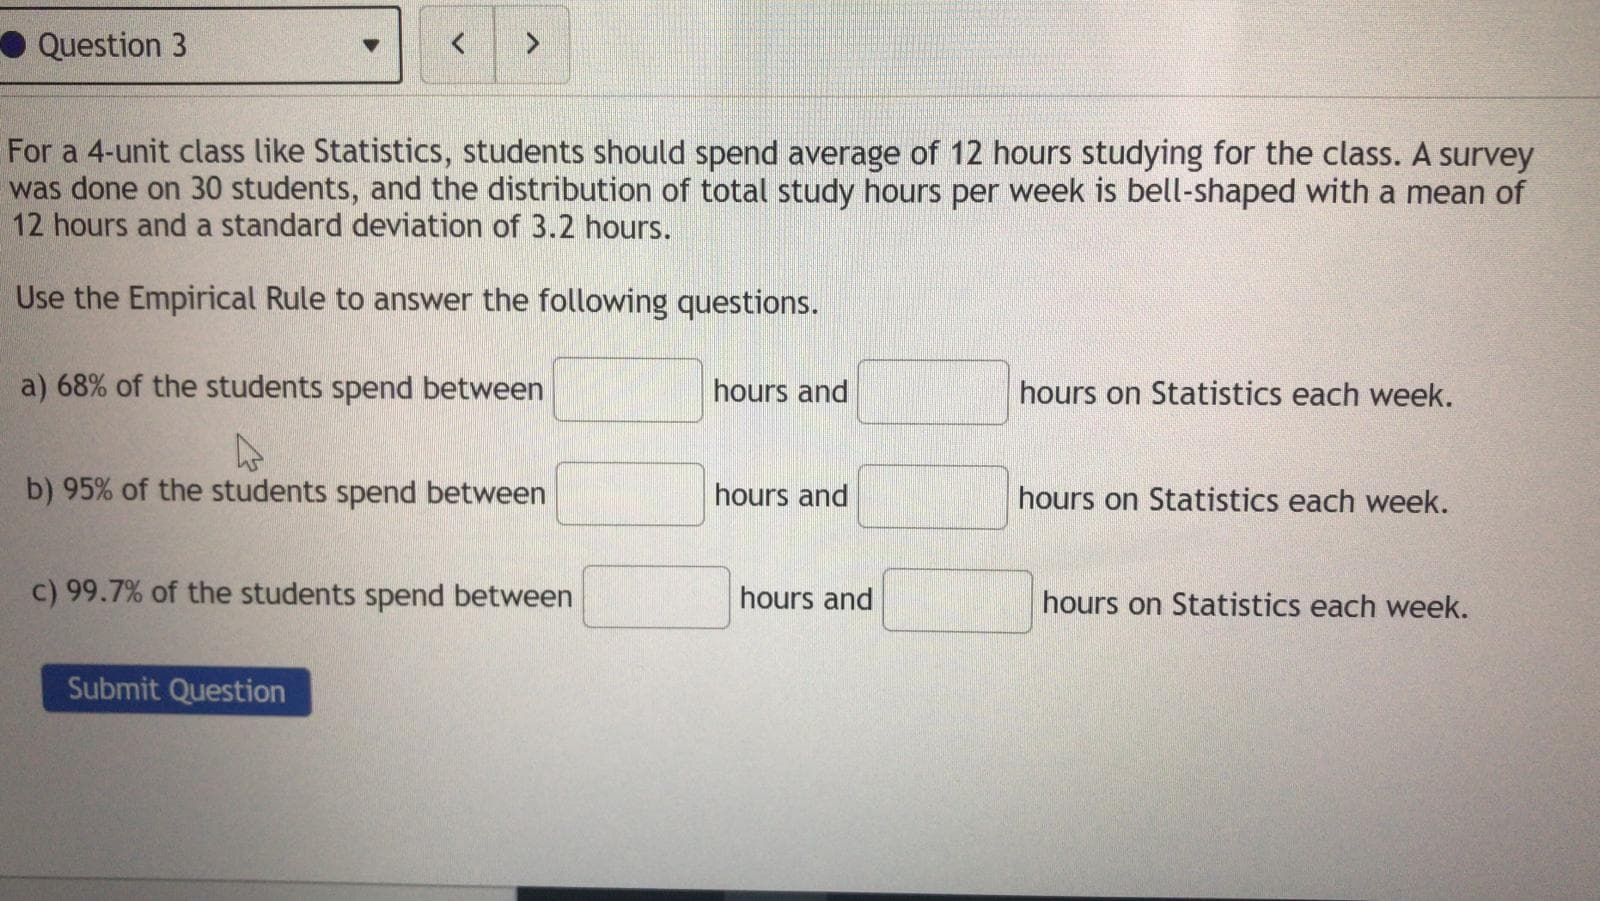 For a 4-unit class like Statistics, students should spend average of 12 hours studying for the class. A survey
was done on 30 students, and the distribution of total study hours per week is bell-shaped with a mean of
12 hours and a standard deviation of 3.2 hours.
Use the Empirical Rule to answer the following questions.
a) 68% of the students spend between
hours and
hours on Statistics each week.
b) 95% of the students spend between
hours and
hours on Statistics each week.
c) 99.7% of the students spend between
hours and
hours on Statistics each week.
